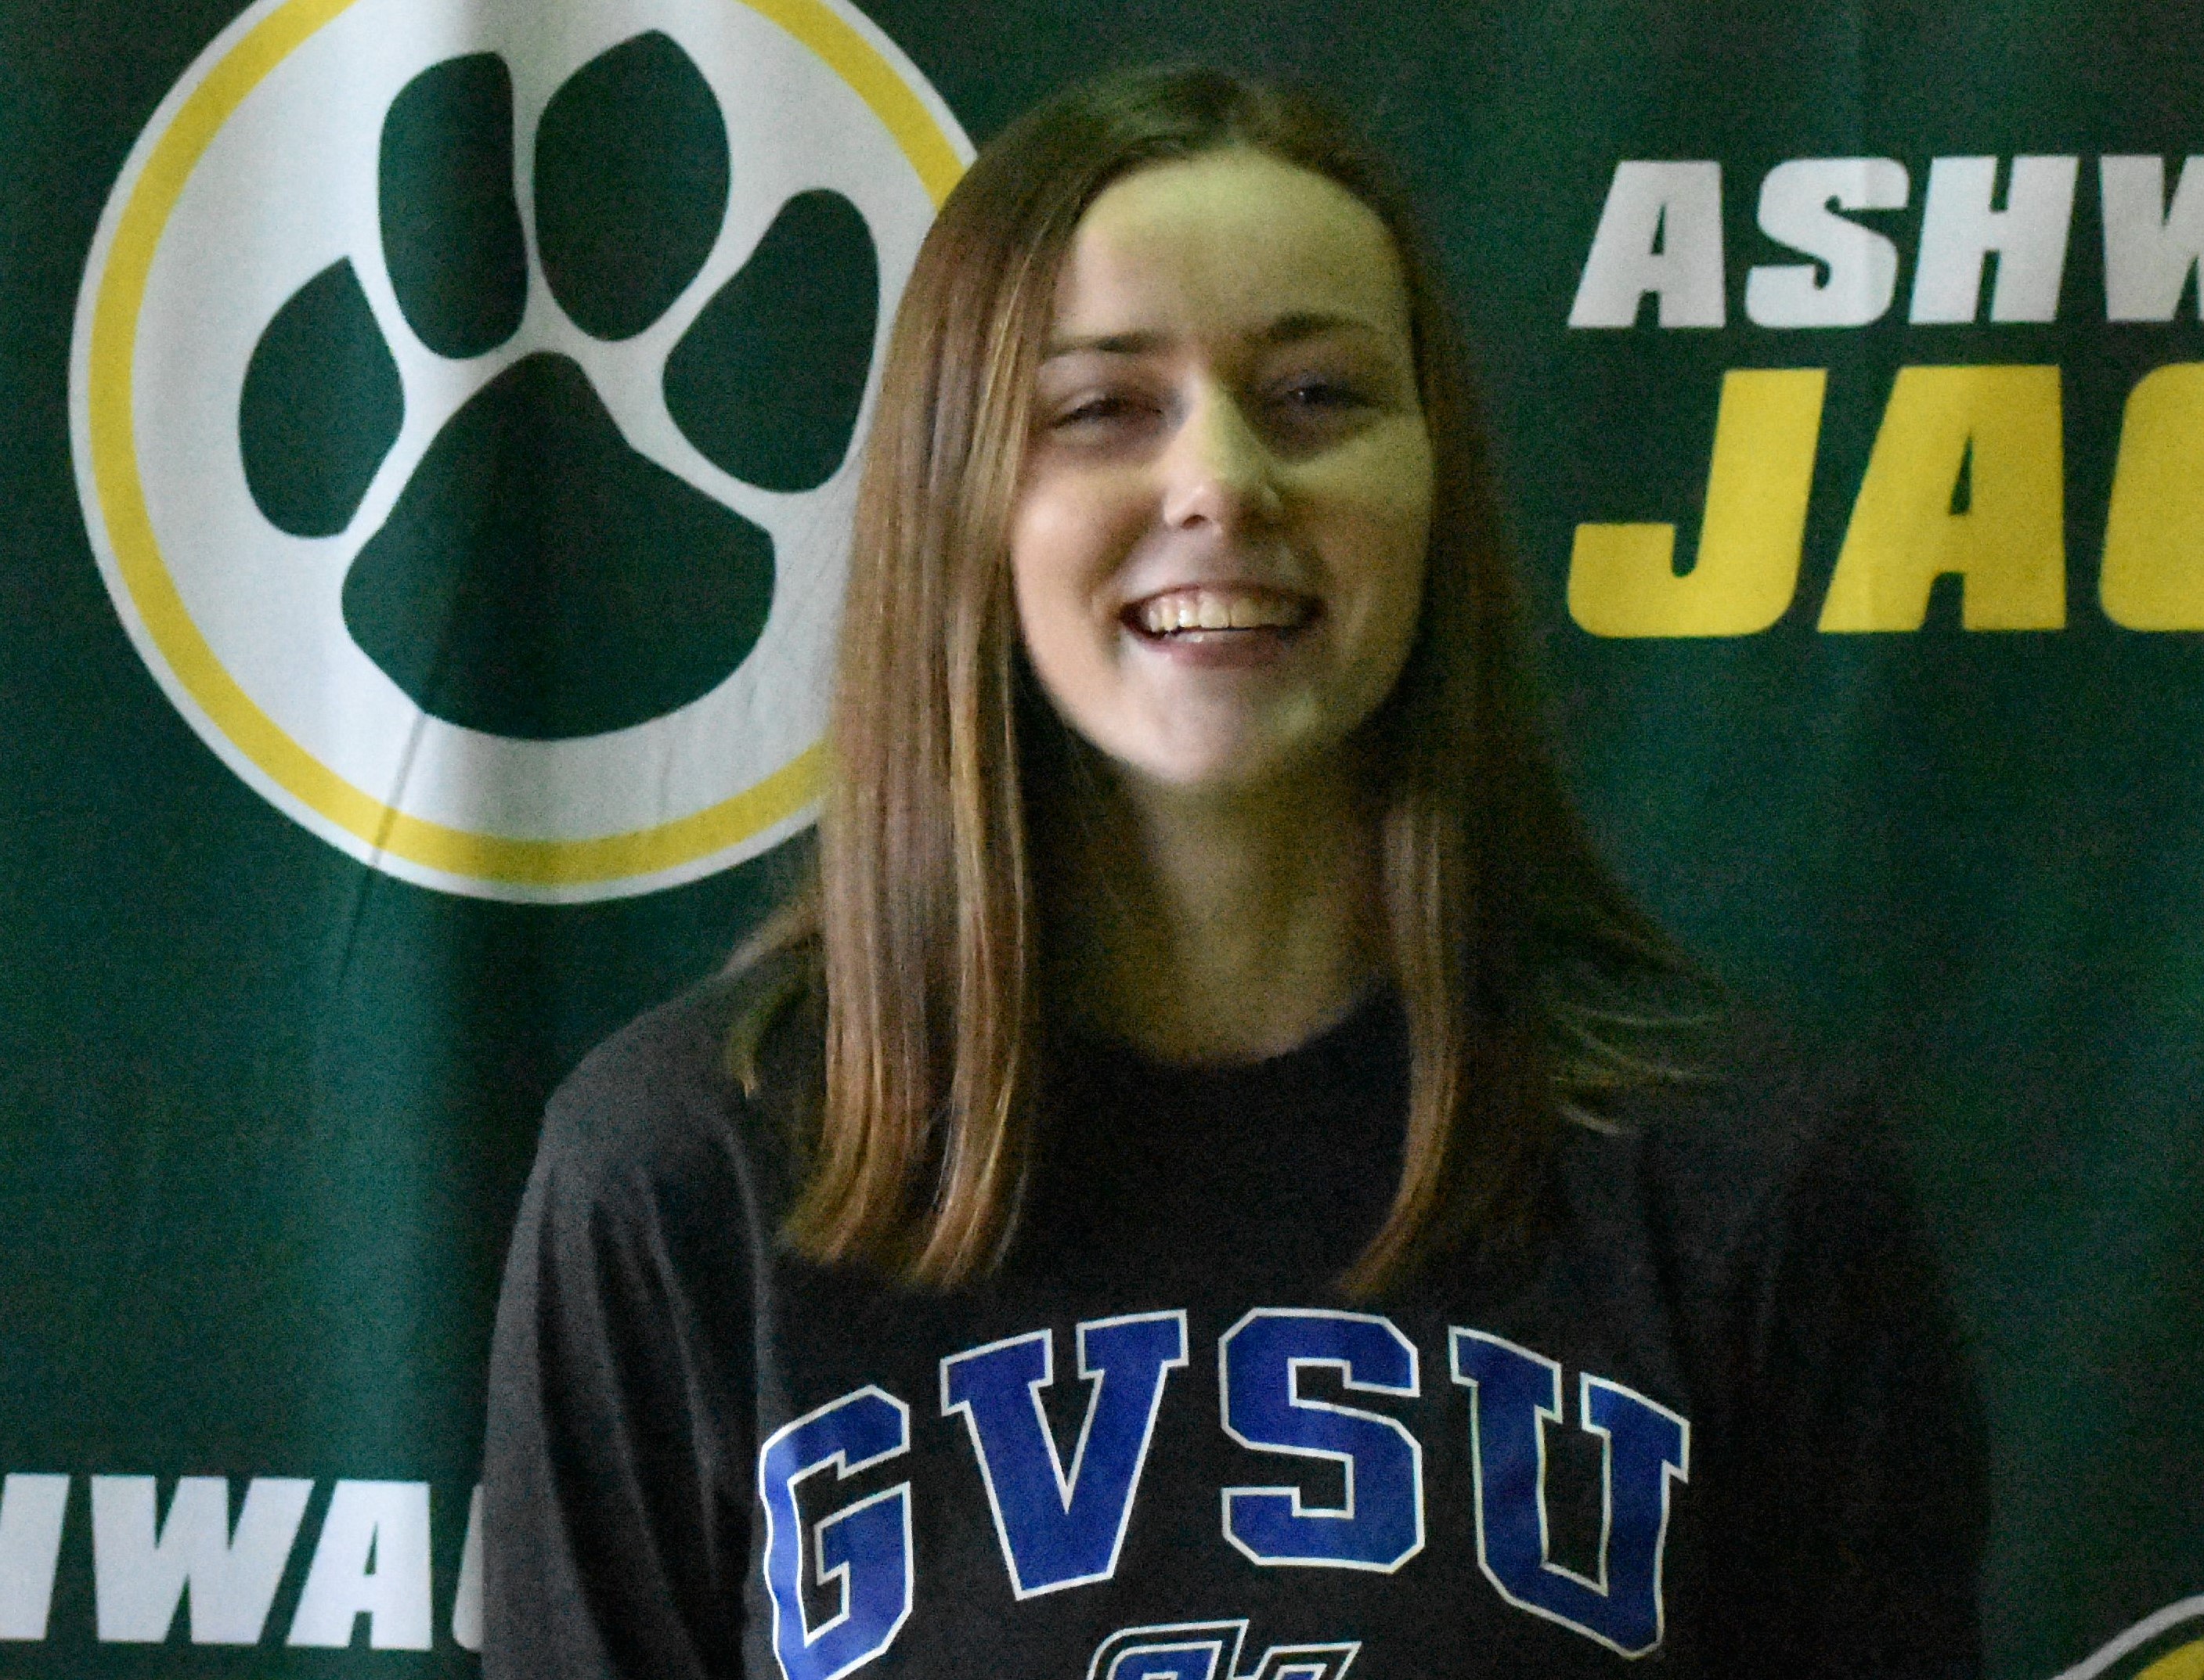 Wagner signs with Grand Valley State